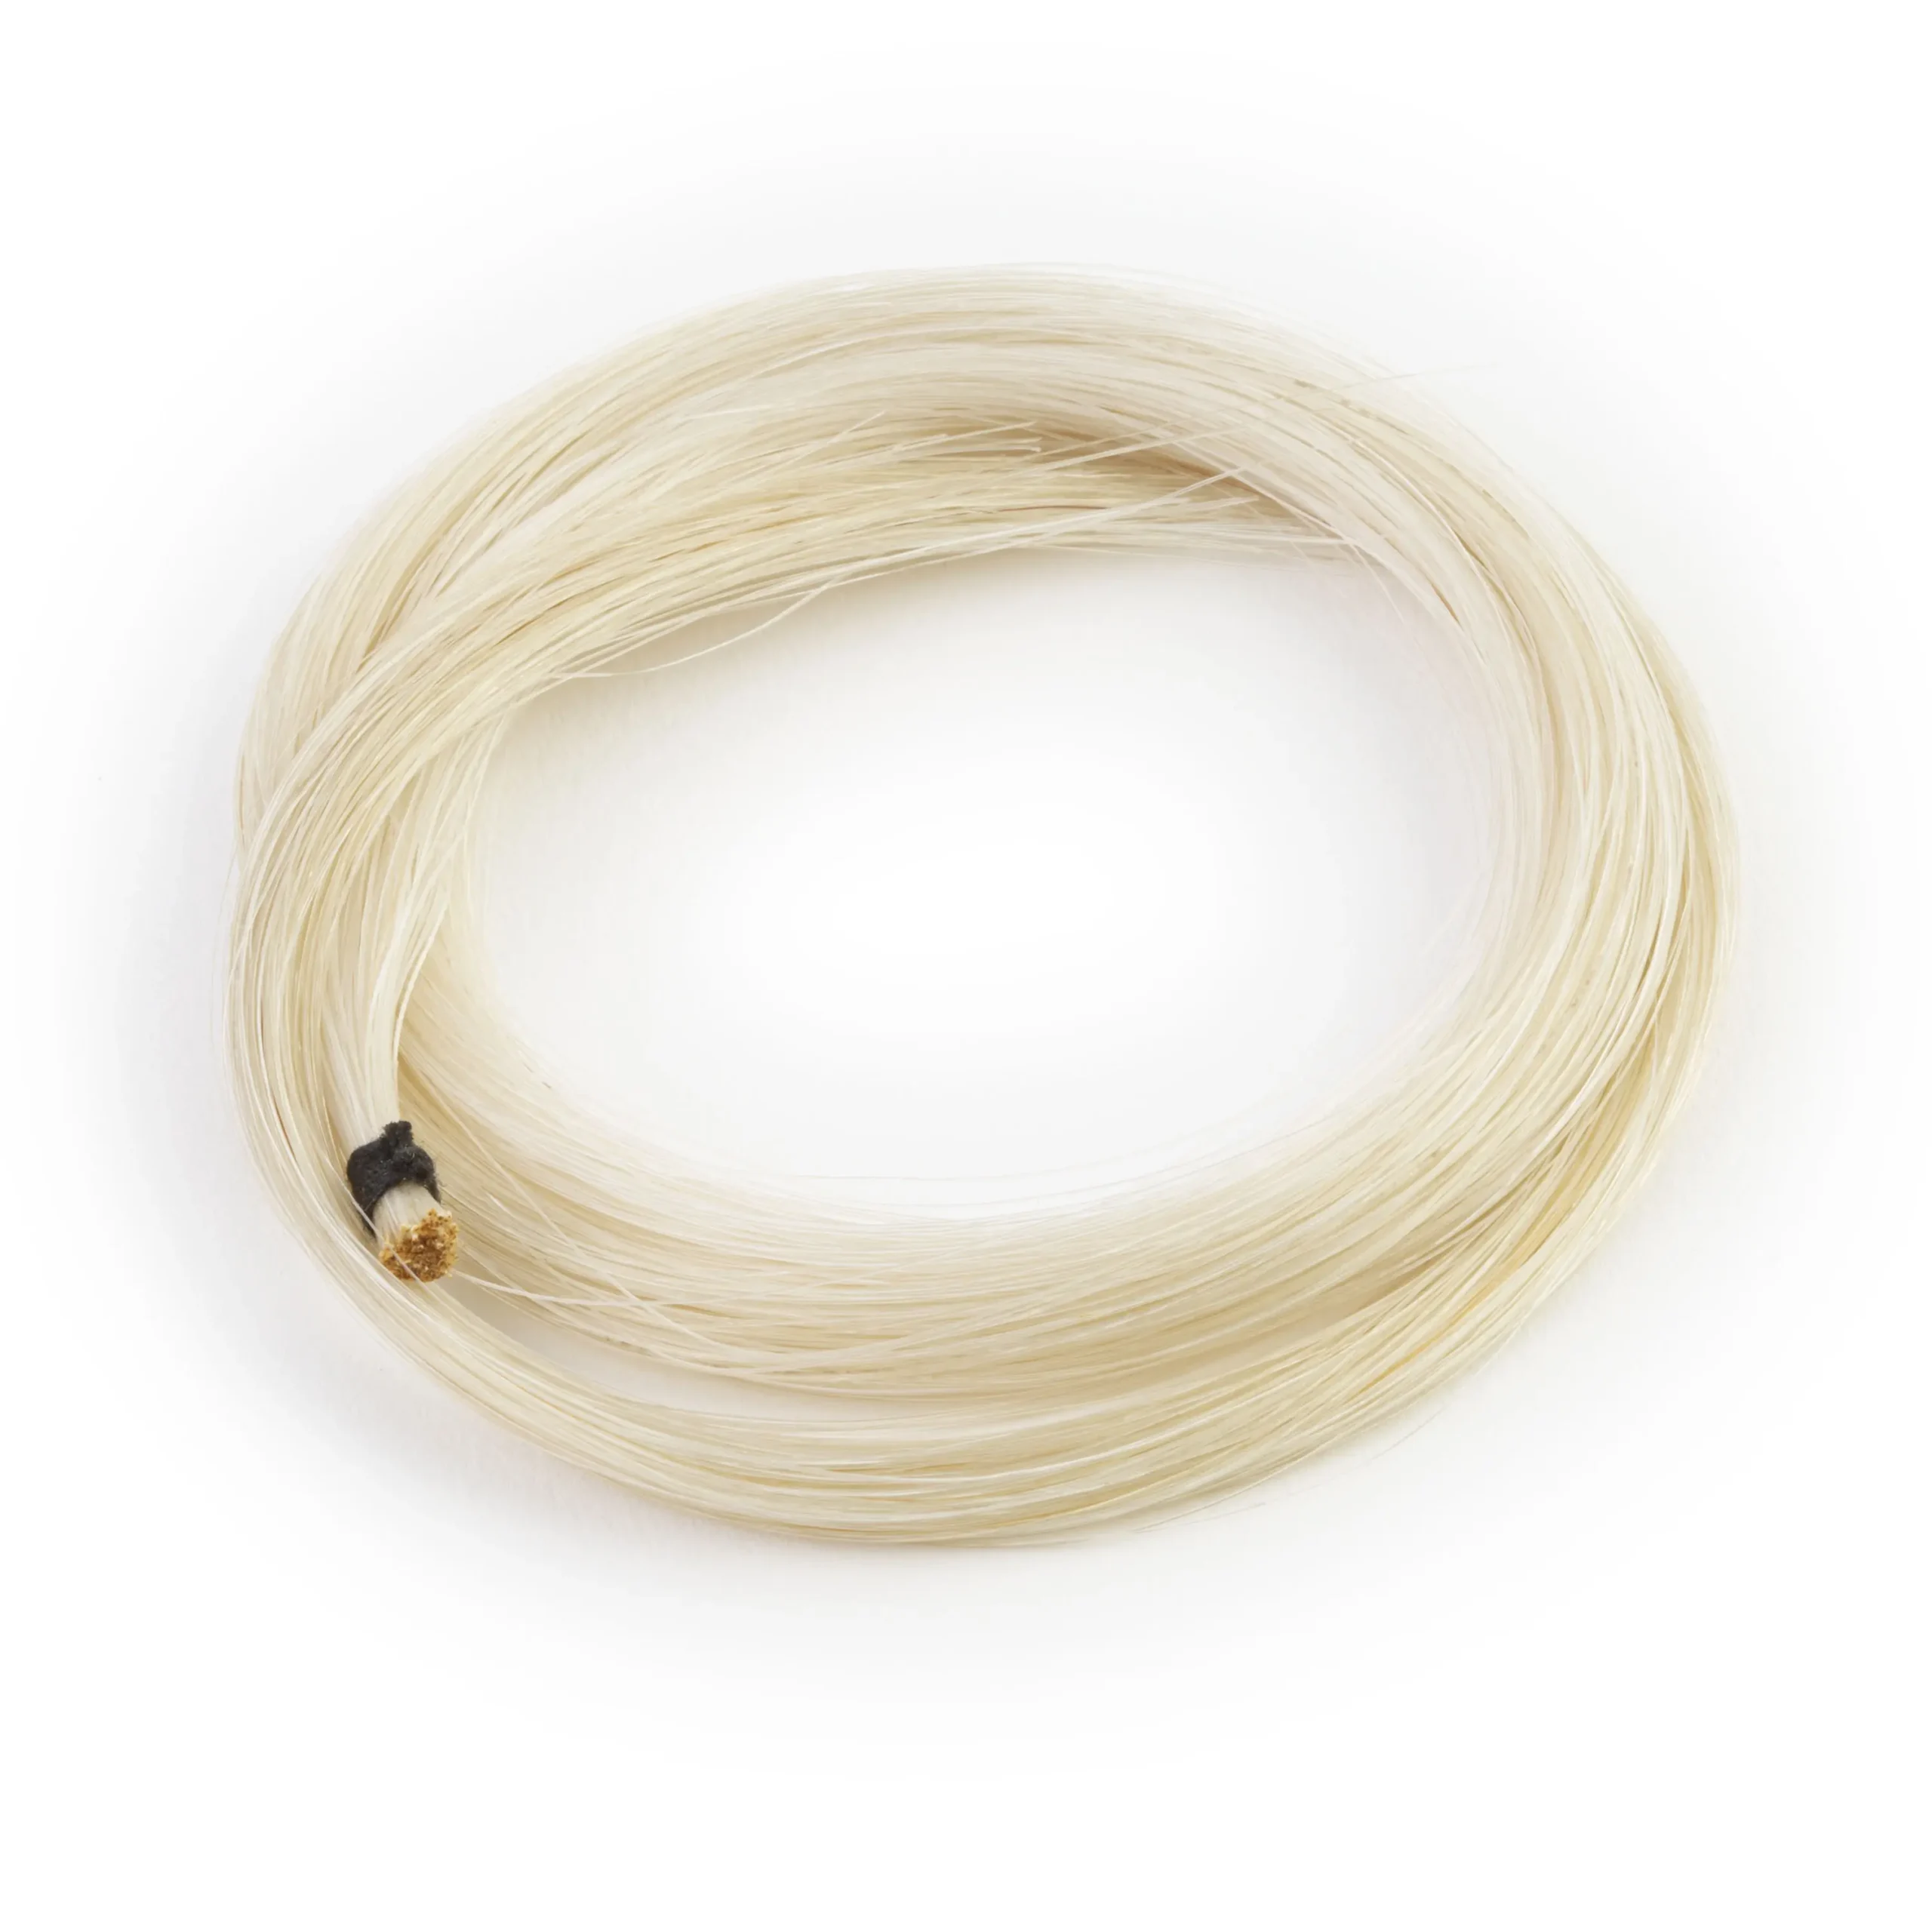 hair for violin bow - What is the alternative to horse hair for violin bows